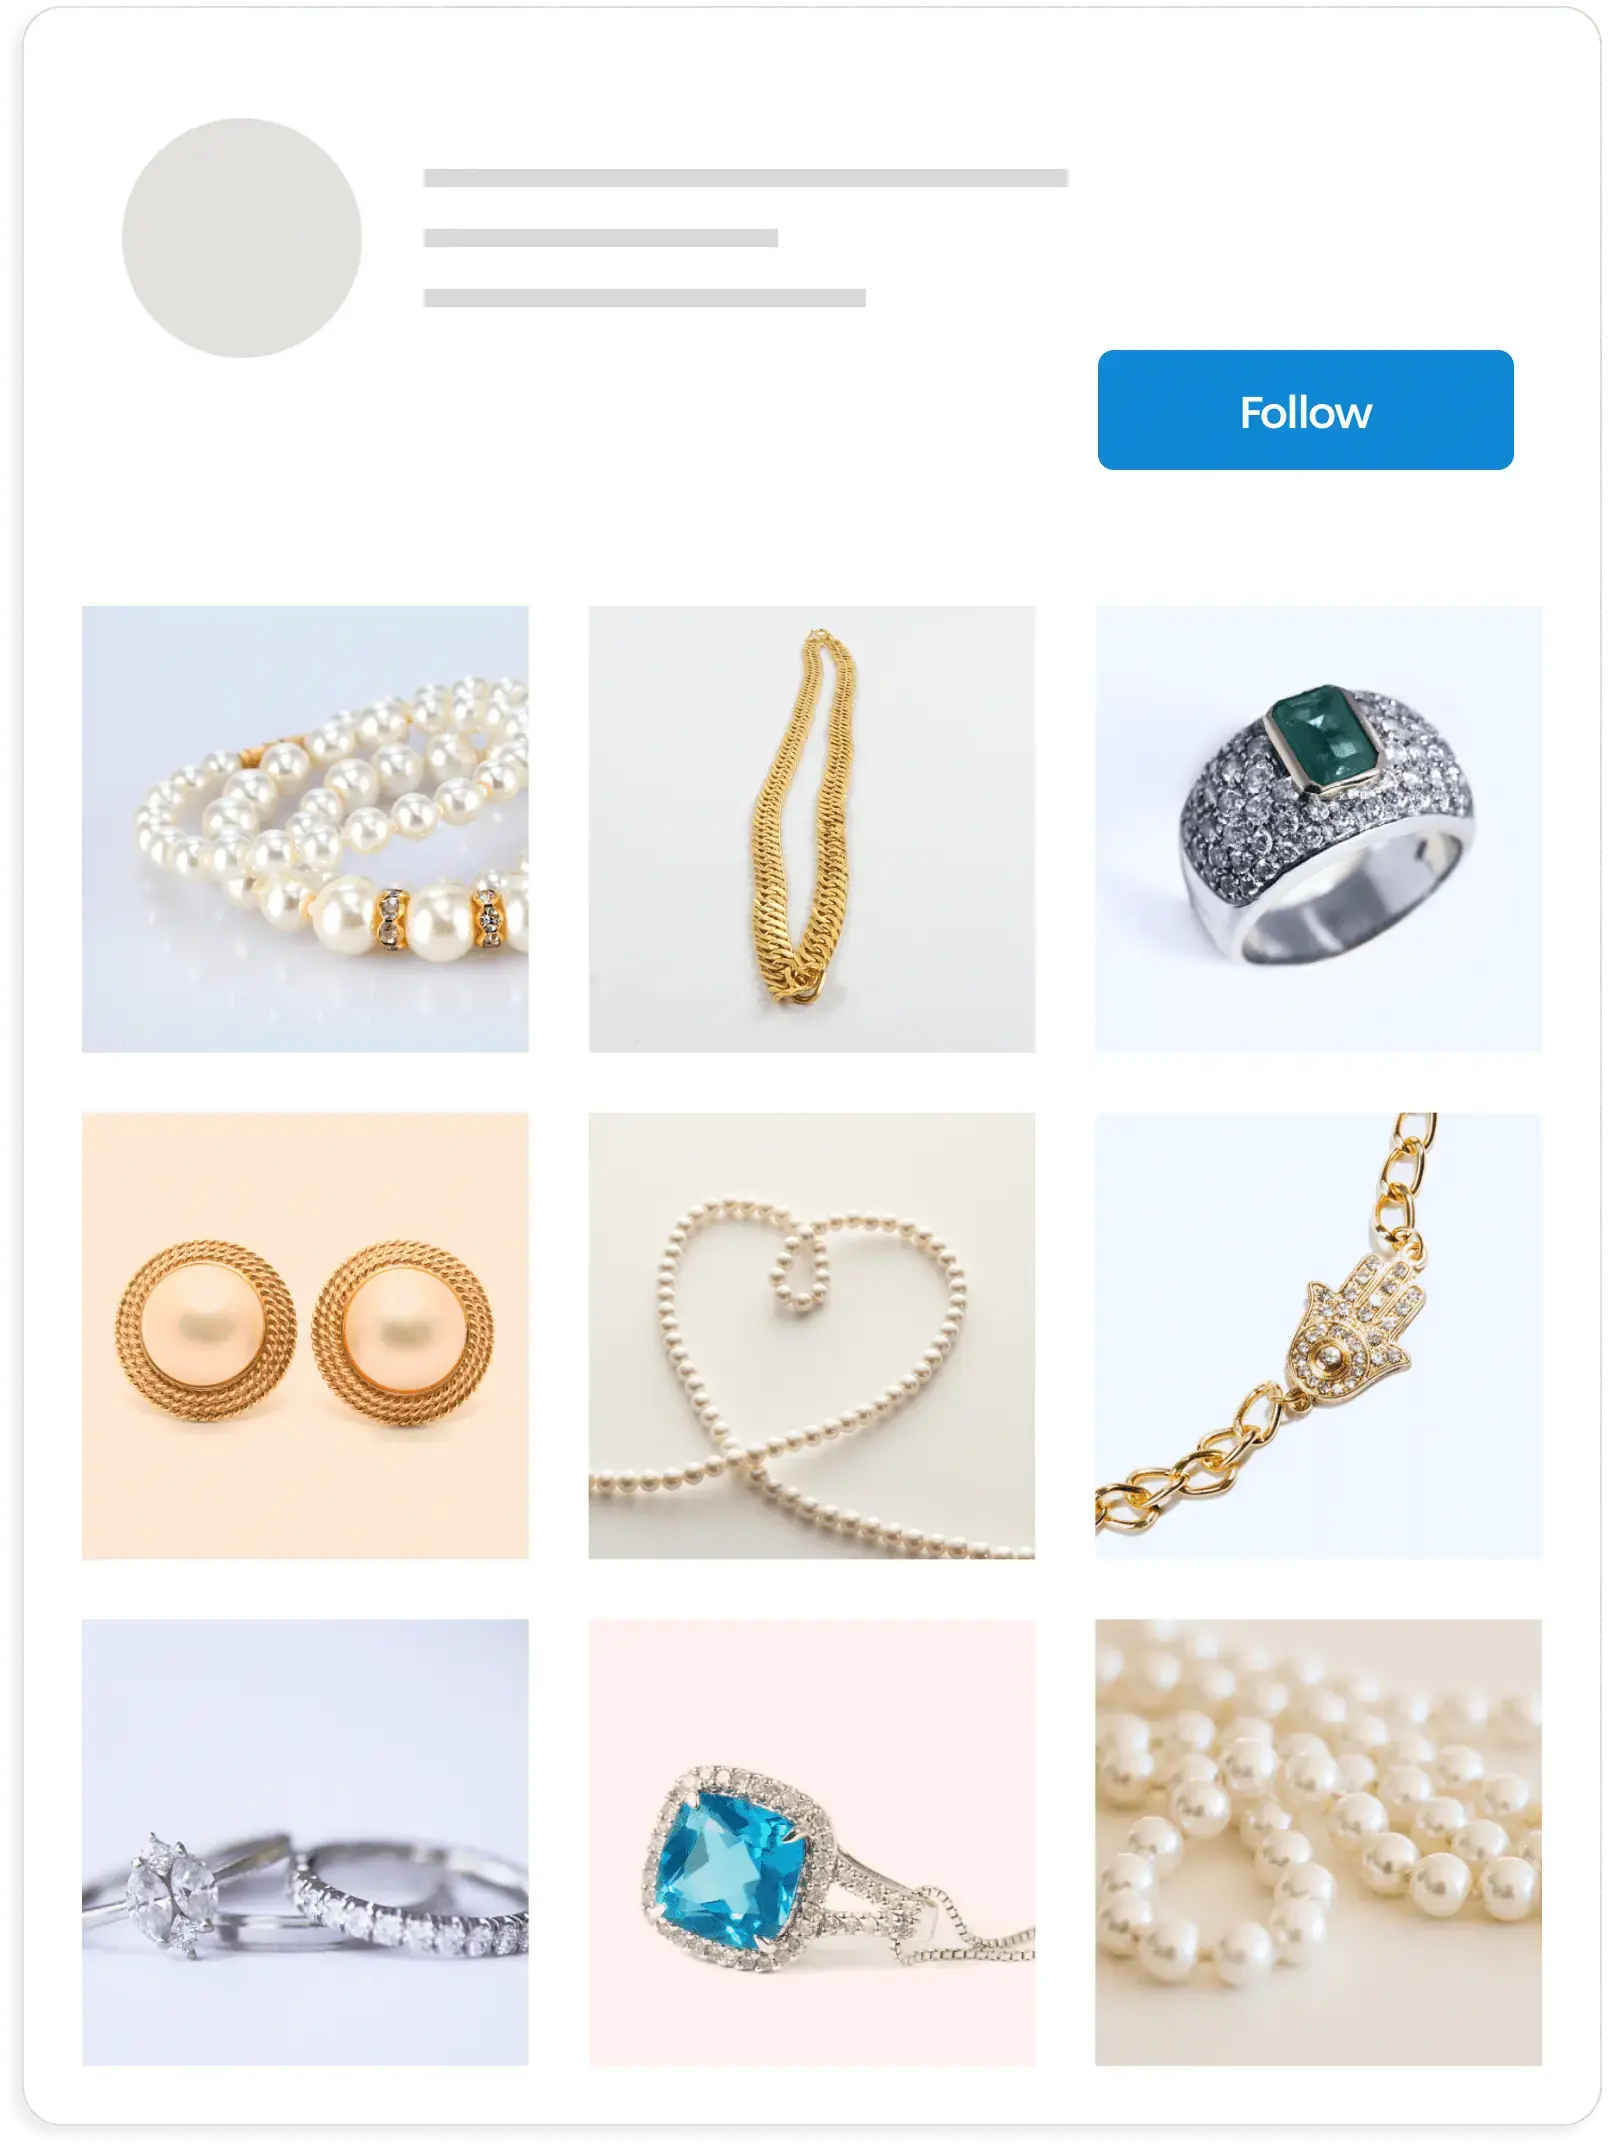 Example of an Instagram feed grid with posts that are related and focused on a jewelry business.